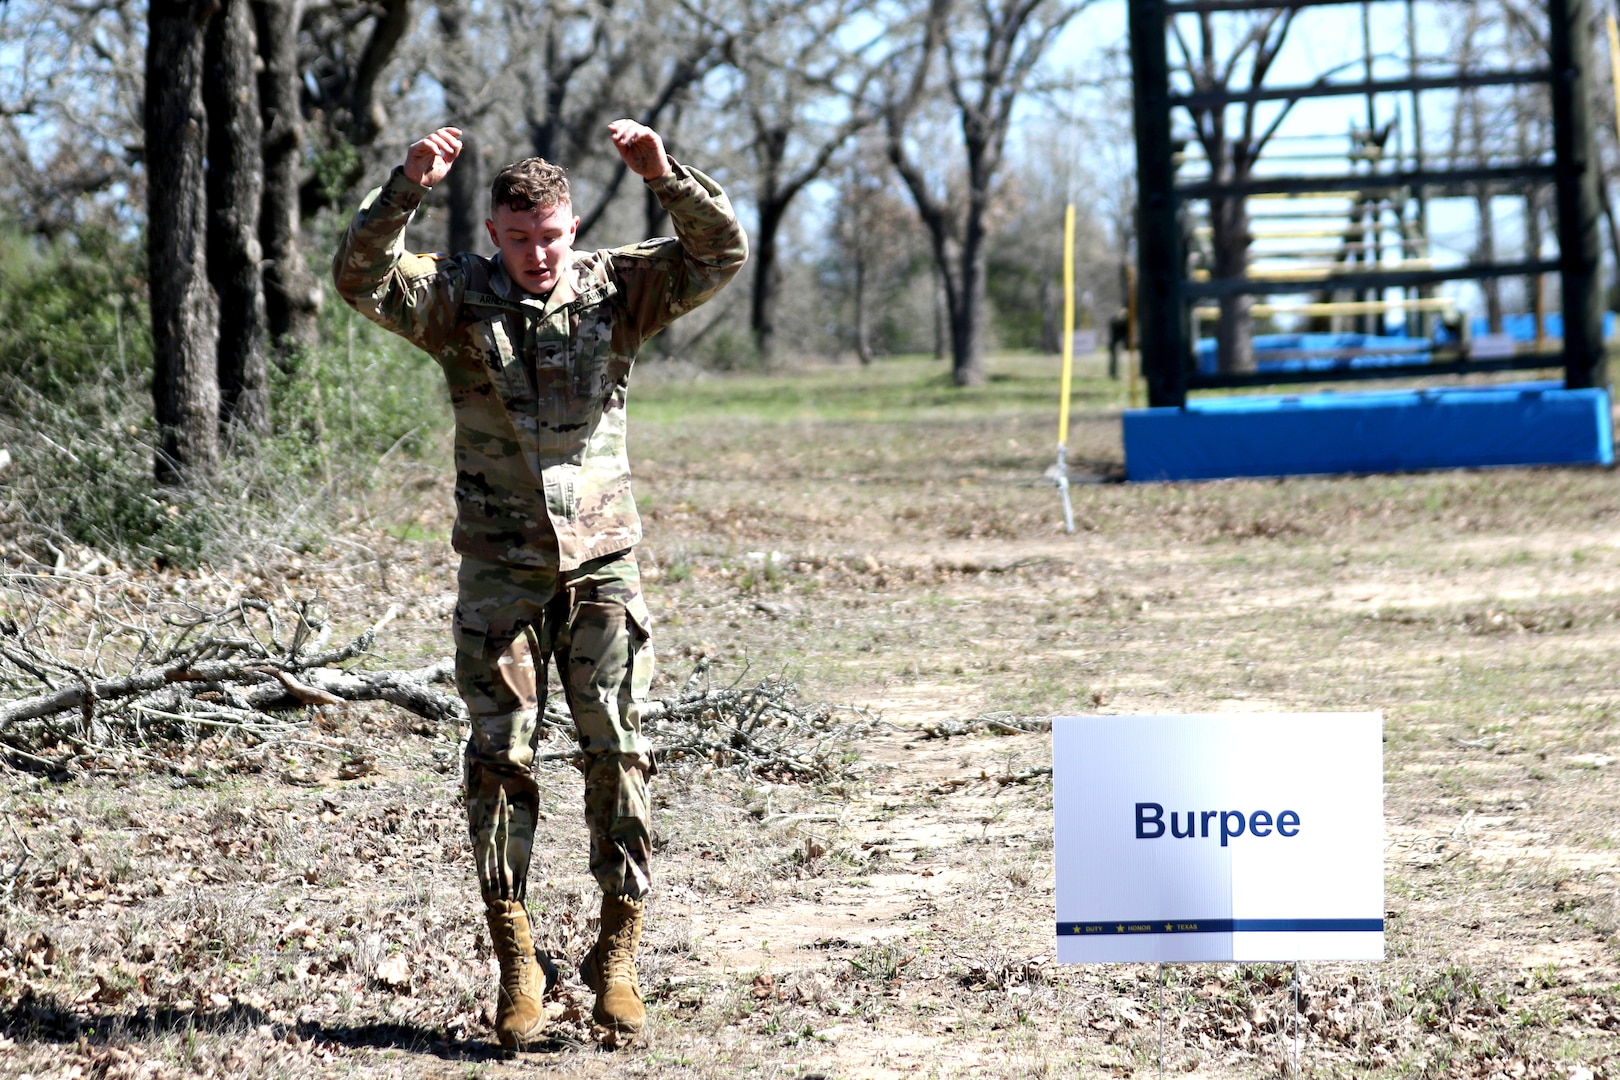 Army Spc. Jacob D. Arndt performs 25 burpees as part of the obstacle course during the Texas Military Department’s 2020 Best Warrior Competition March 5, 2020, at Camp Swift near Bastrop, Texas. Arndt, part of the 176th Engineers Brigade, is attending college and plans to commission as an officer through Reserve Officer Training Course (ROTC).